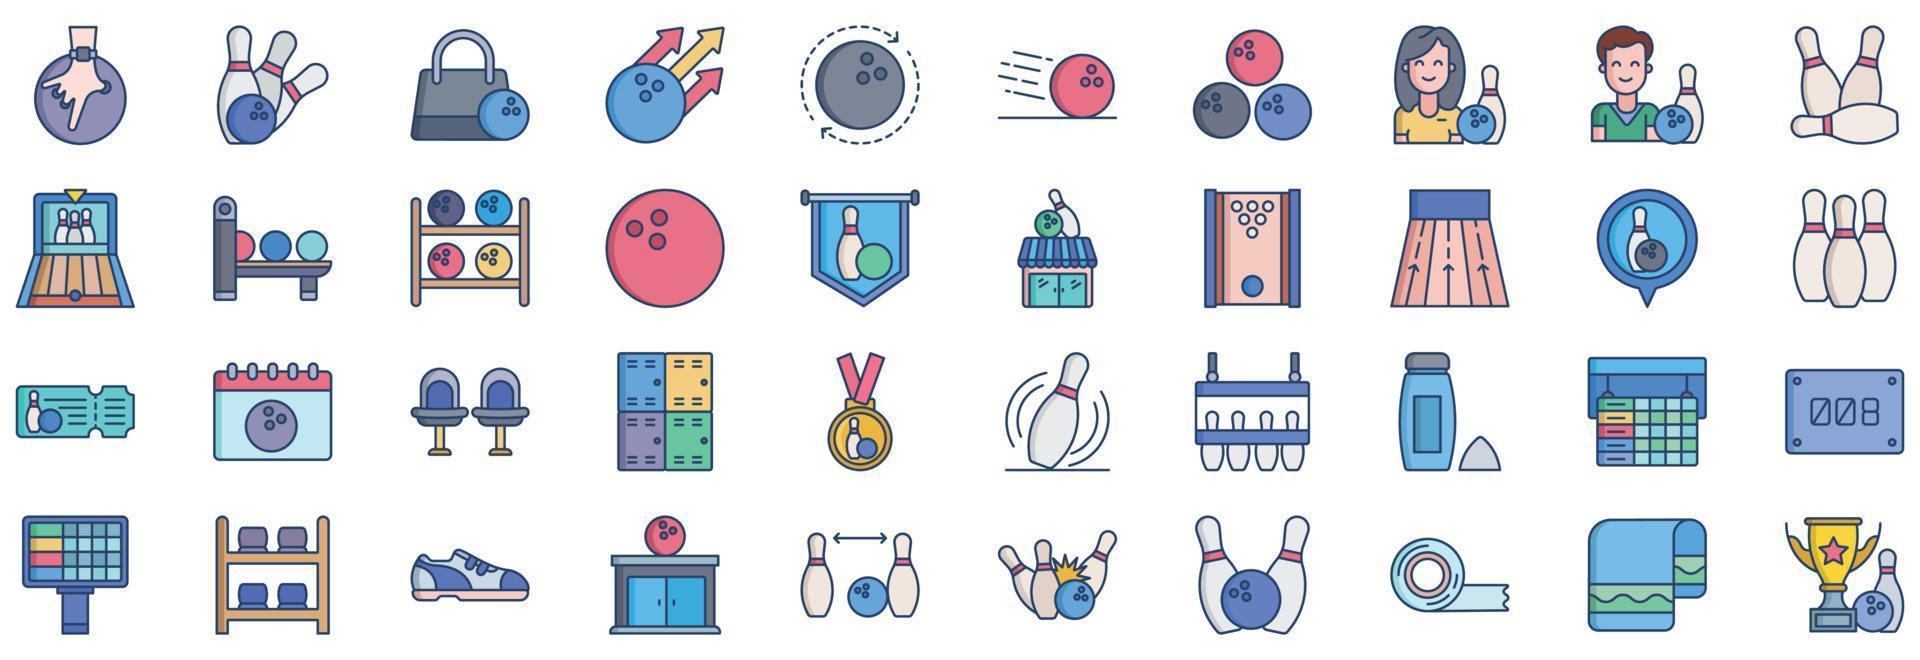 Collection of icons related to Bowling, including icons like Ball, Pin, Medal and more. vector illustrations, Pixel Perfect set